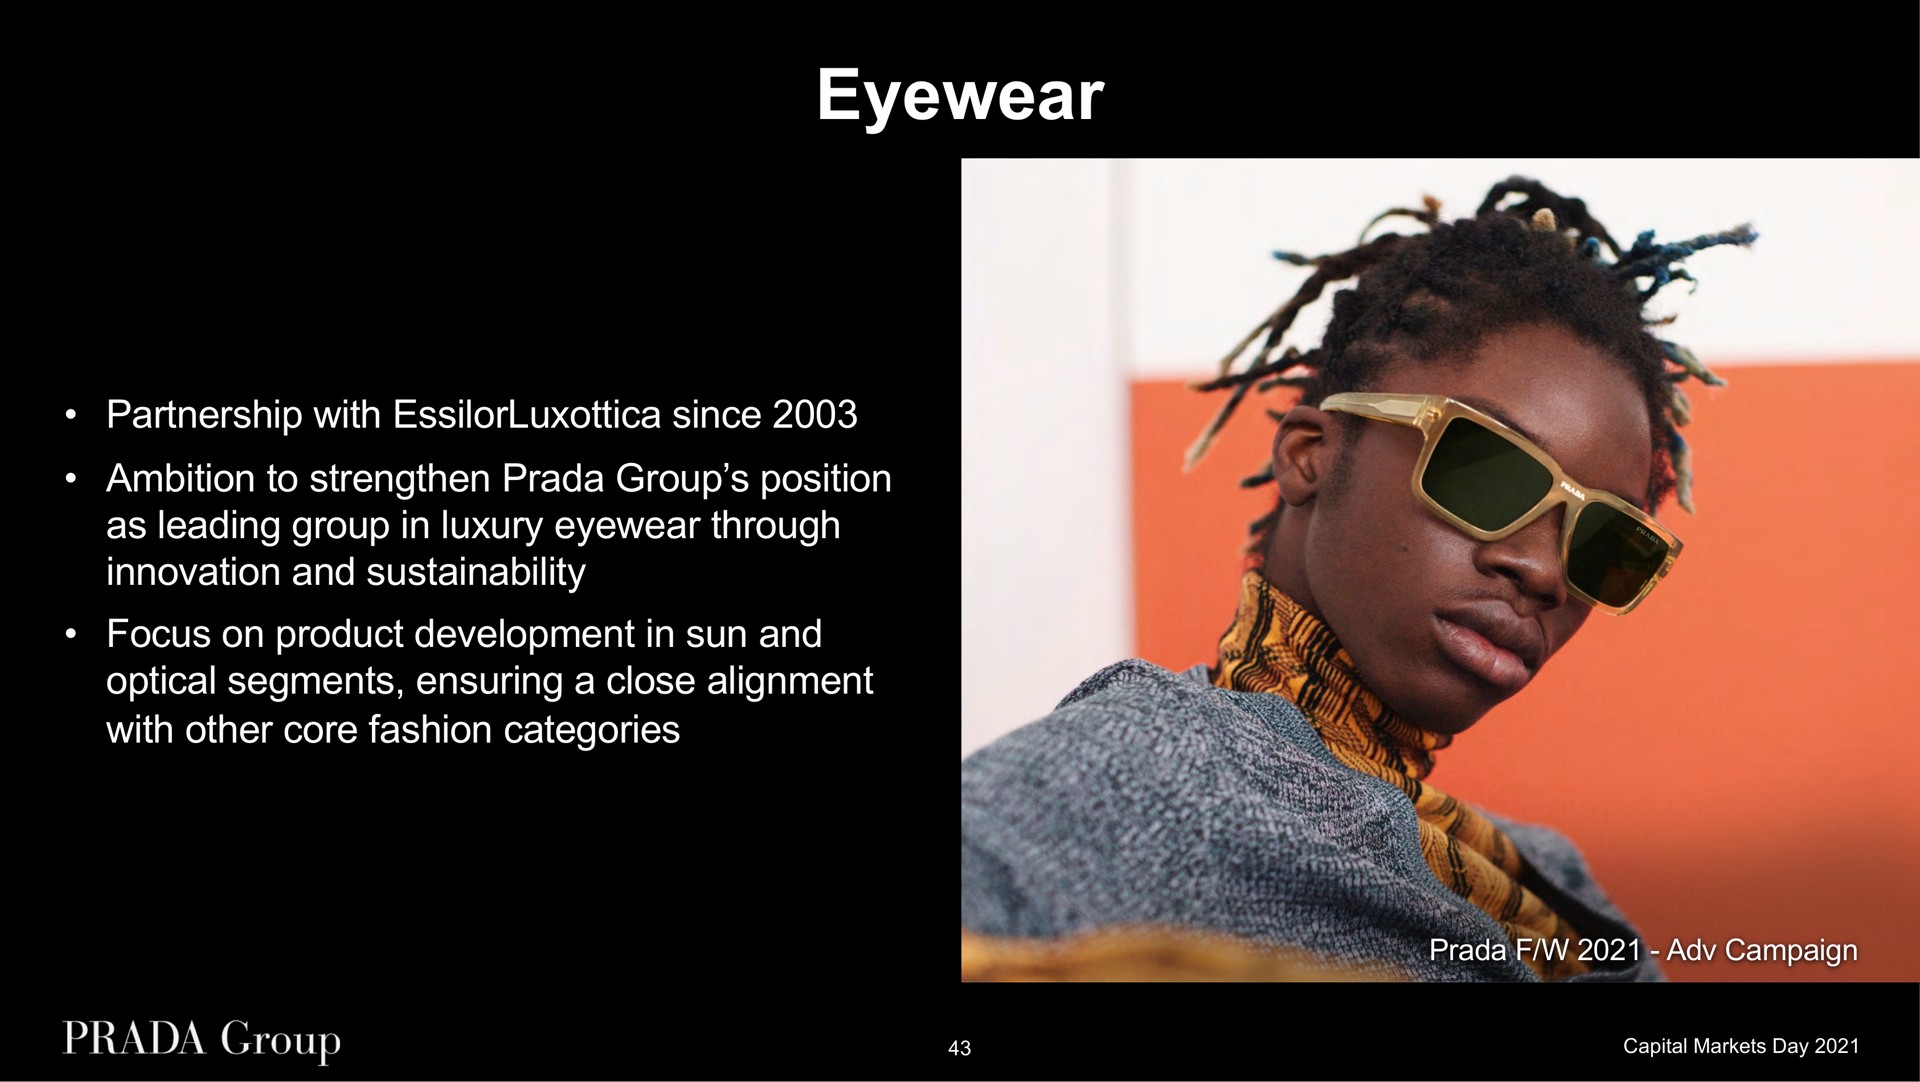 eyewear partnership with since ambition to strengthen group position as leading group in luxury eyewear through innovation and focus on product development in sun and optical segments ensuring a close alignment with other core fashion categories campaign | Prada